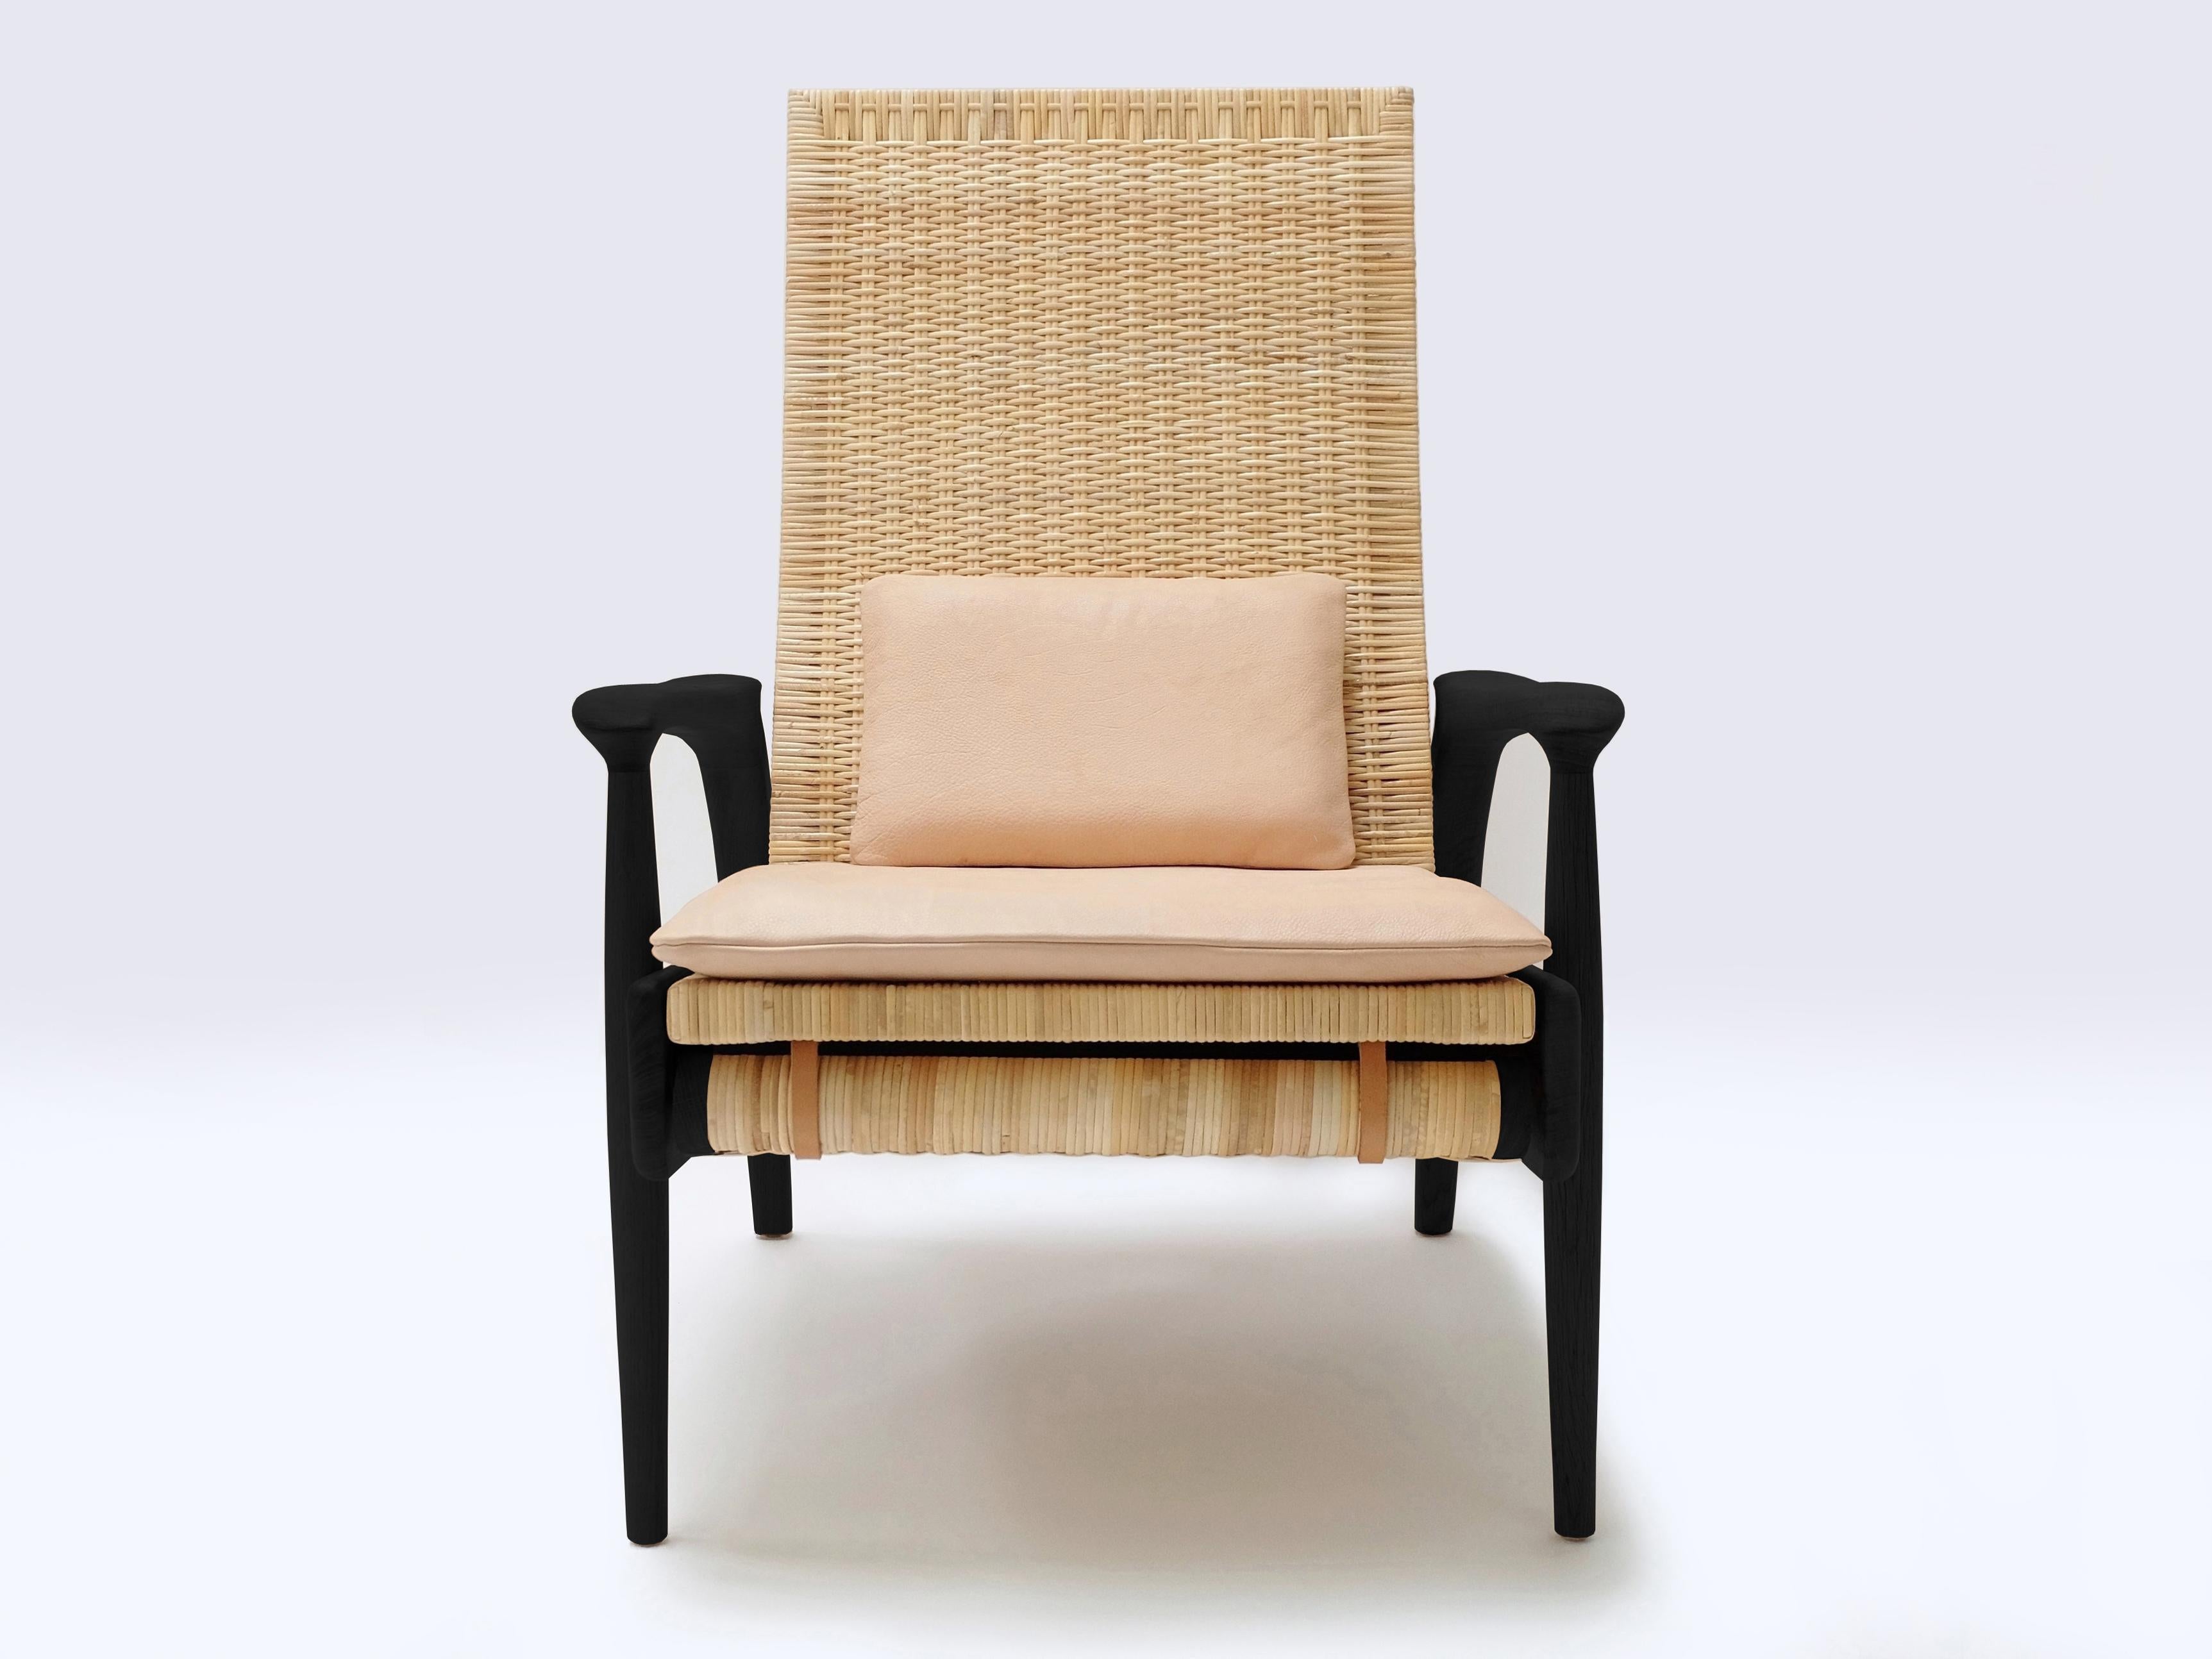 Custom-made Lounge Chair, natural blackended Oak, Natural Cane, Leather Cushions In New Condition For Sale In London, GB